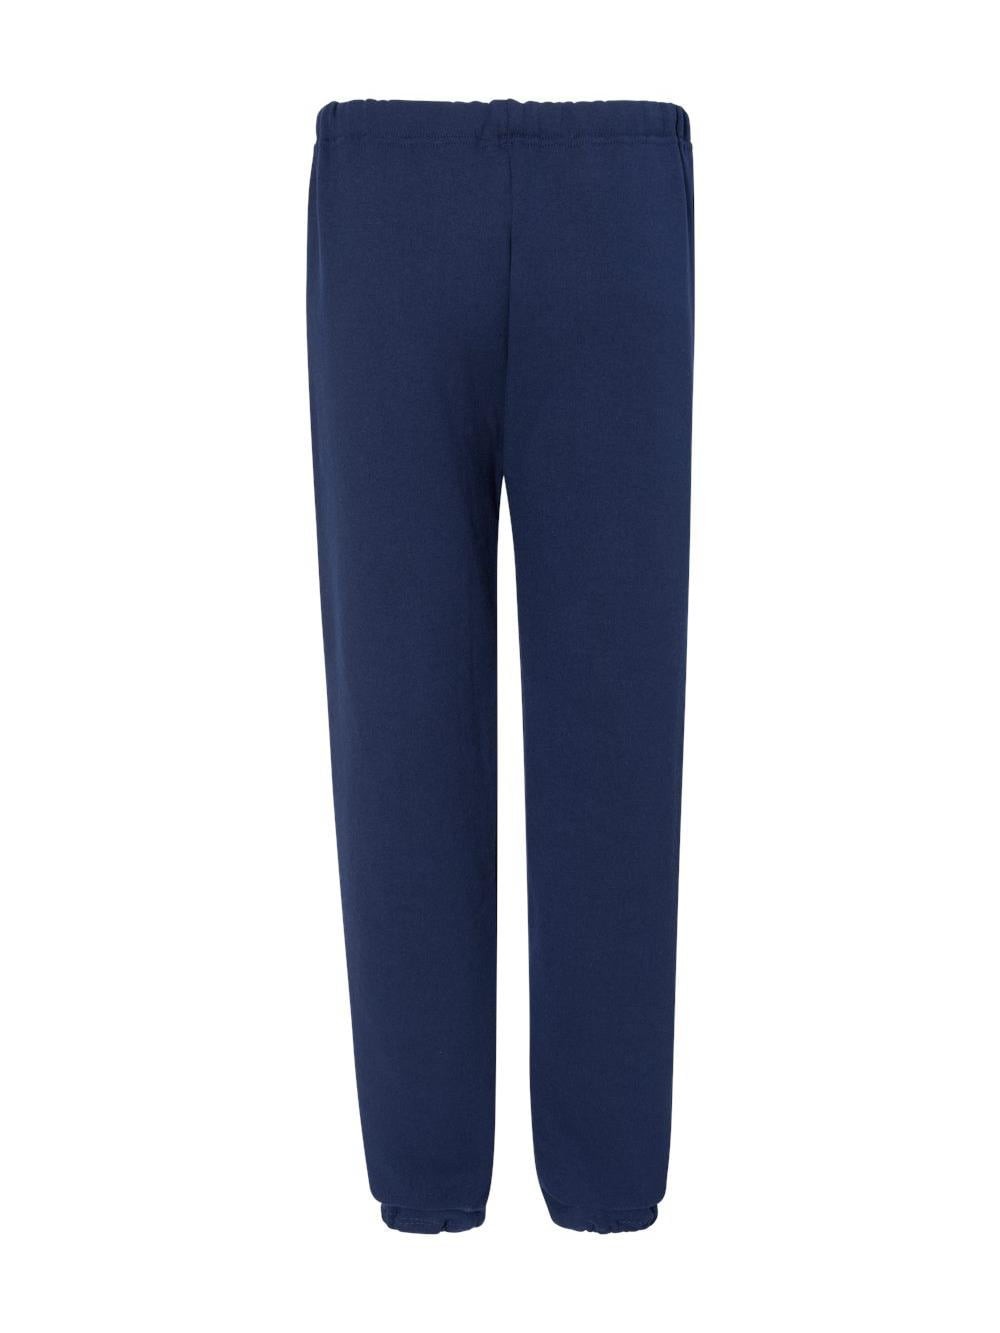  Dri-Power Closed Bottom Fleece Pant - Oxford - Small :  Clothing, Shoes & Jewelry